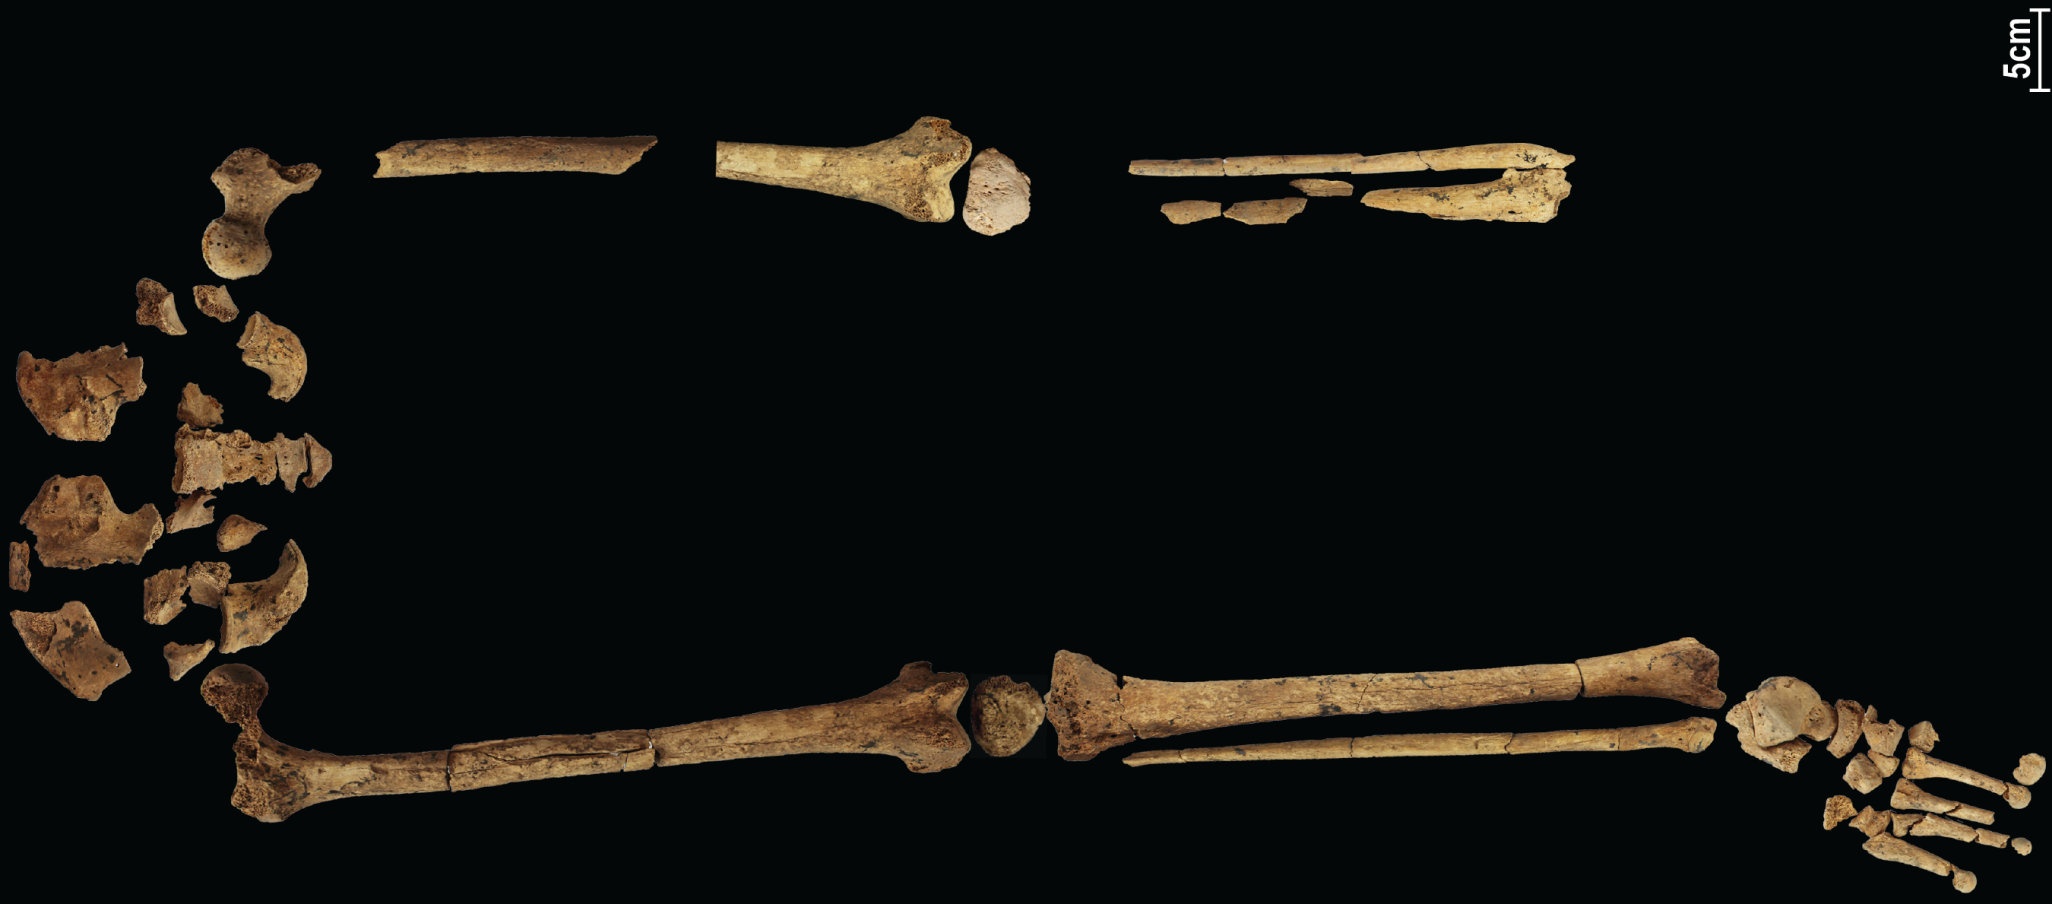 A 31,000-year-old skeleton showing the earliest known complex surgery could rewrite history! 3